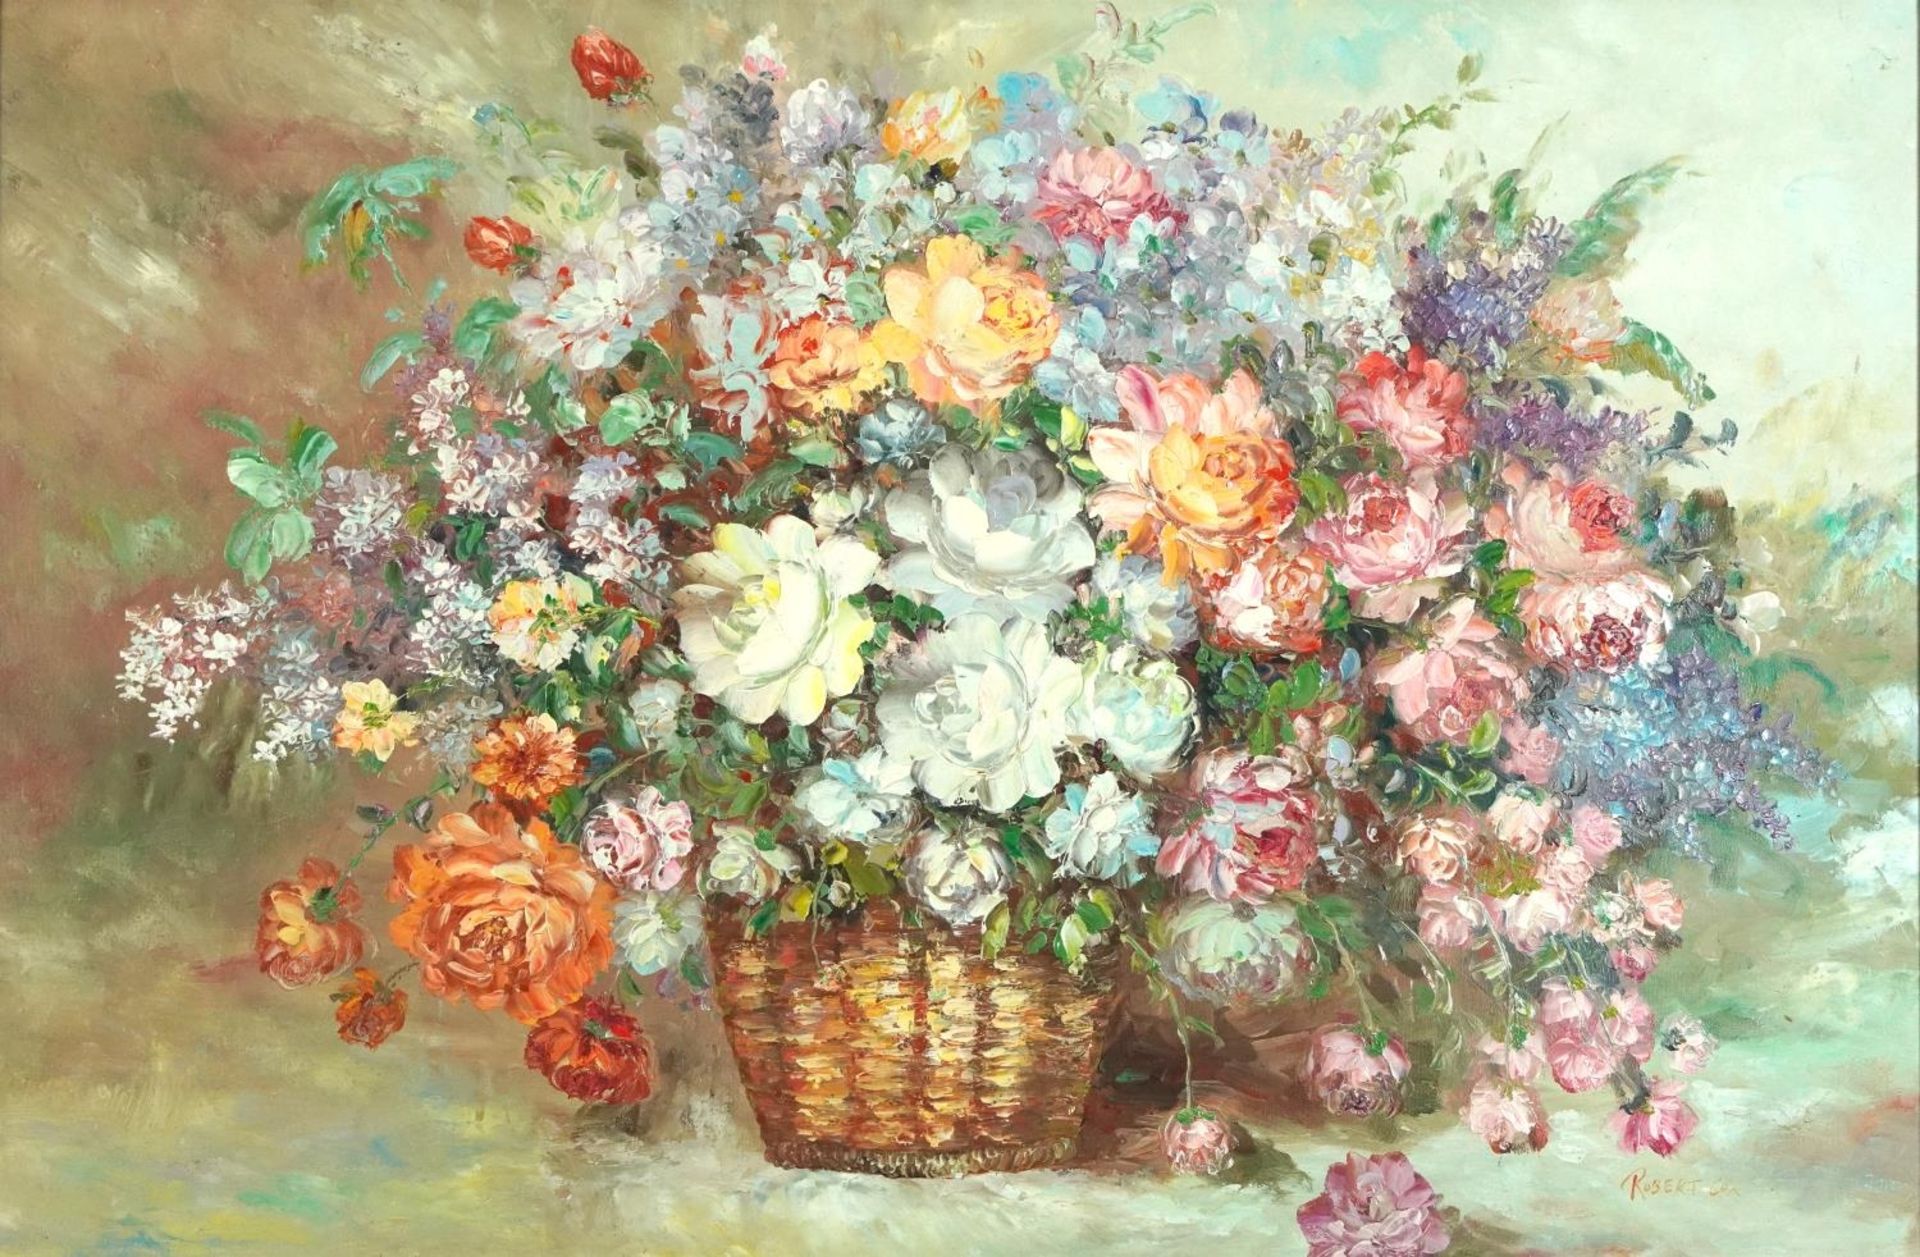 Robert Cox - Still life flowers in a basket, impasto oil on canvas, mounted and framed, 90cm x